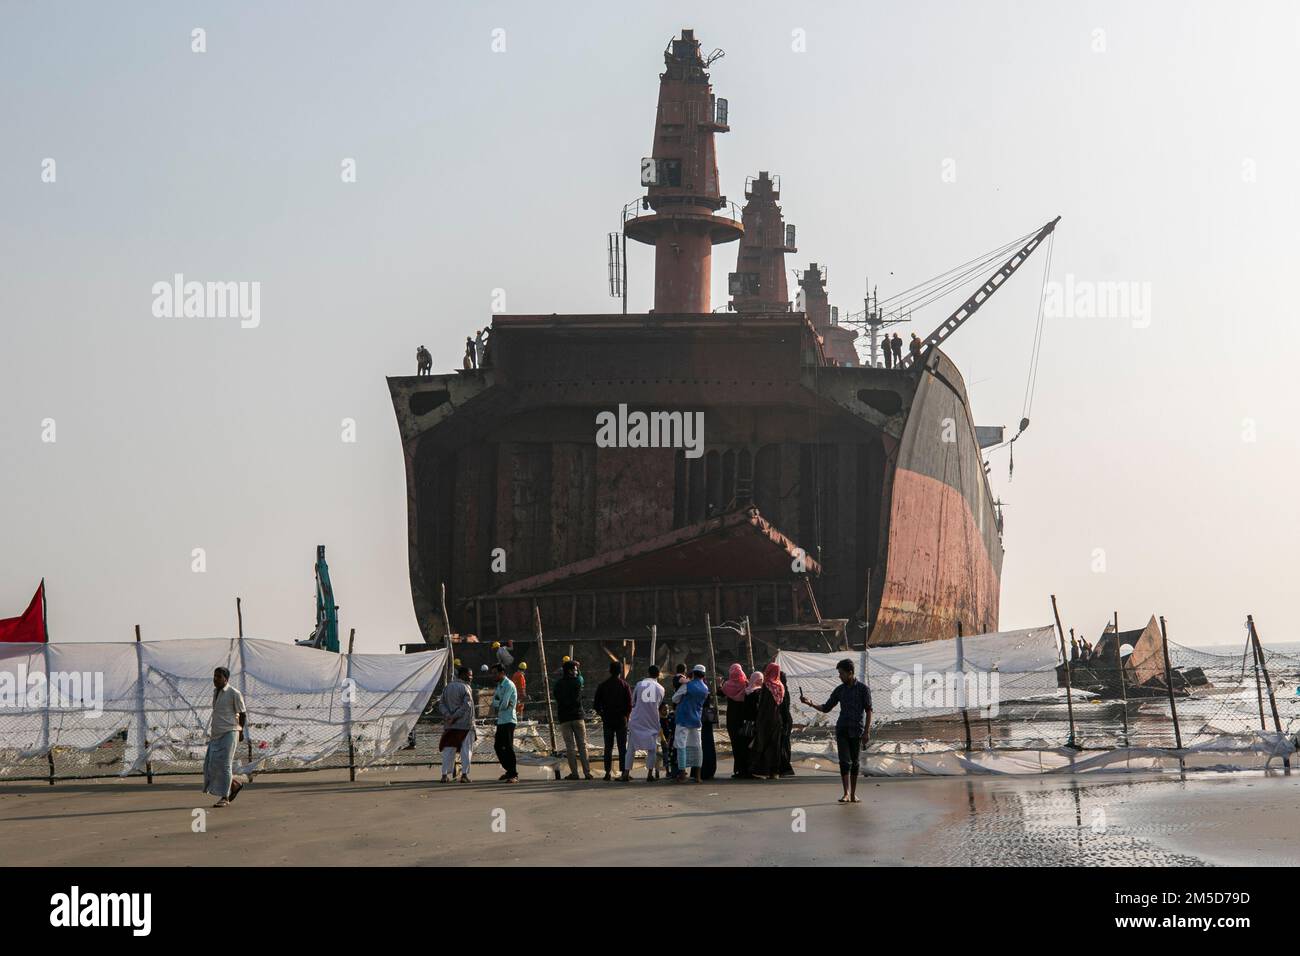 Ship Breaking Yard, Chattogram, Bngladesh, 20 Dec 2021  People watching the work of cutting old ships. Stock Photo